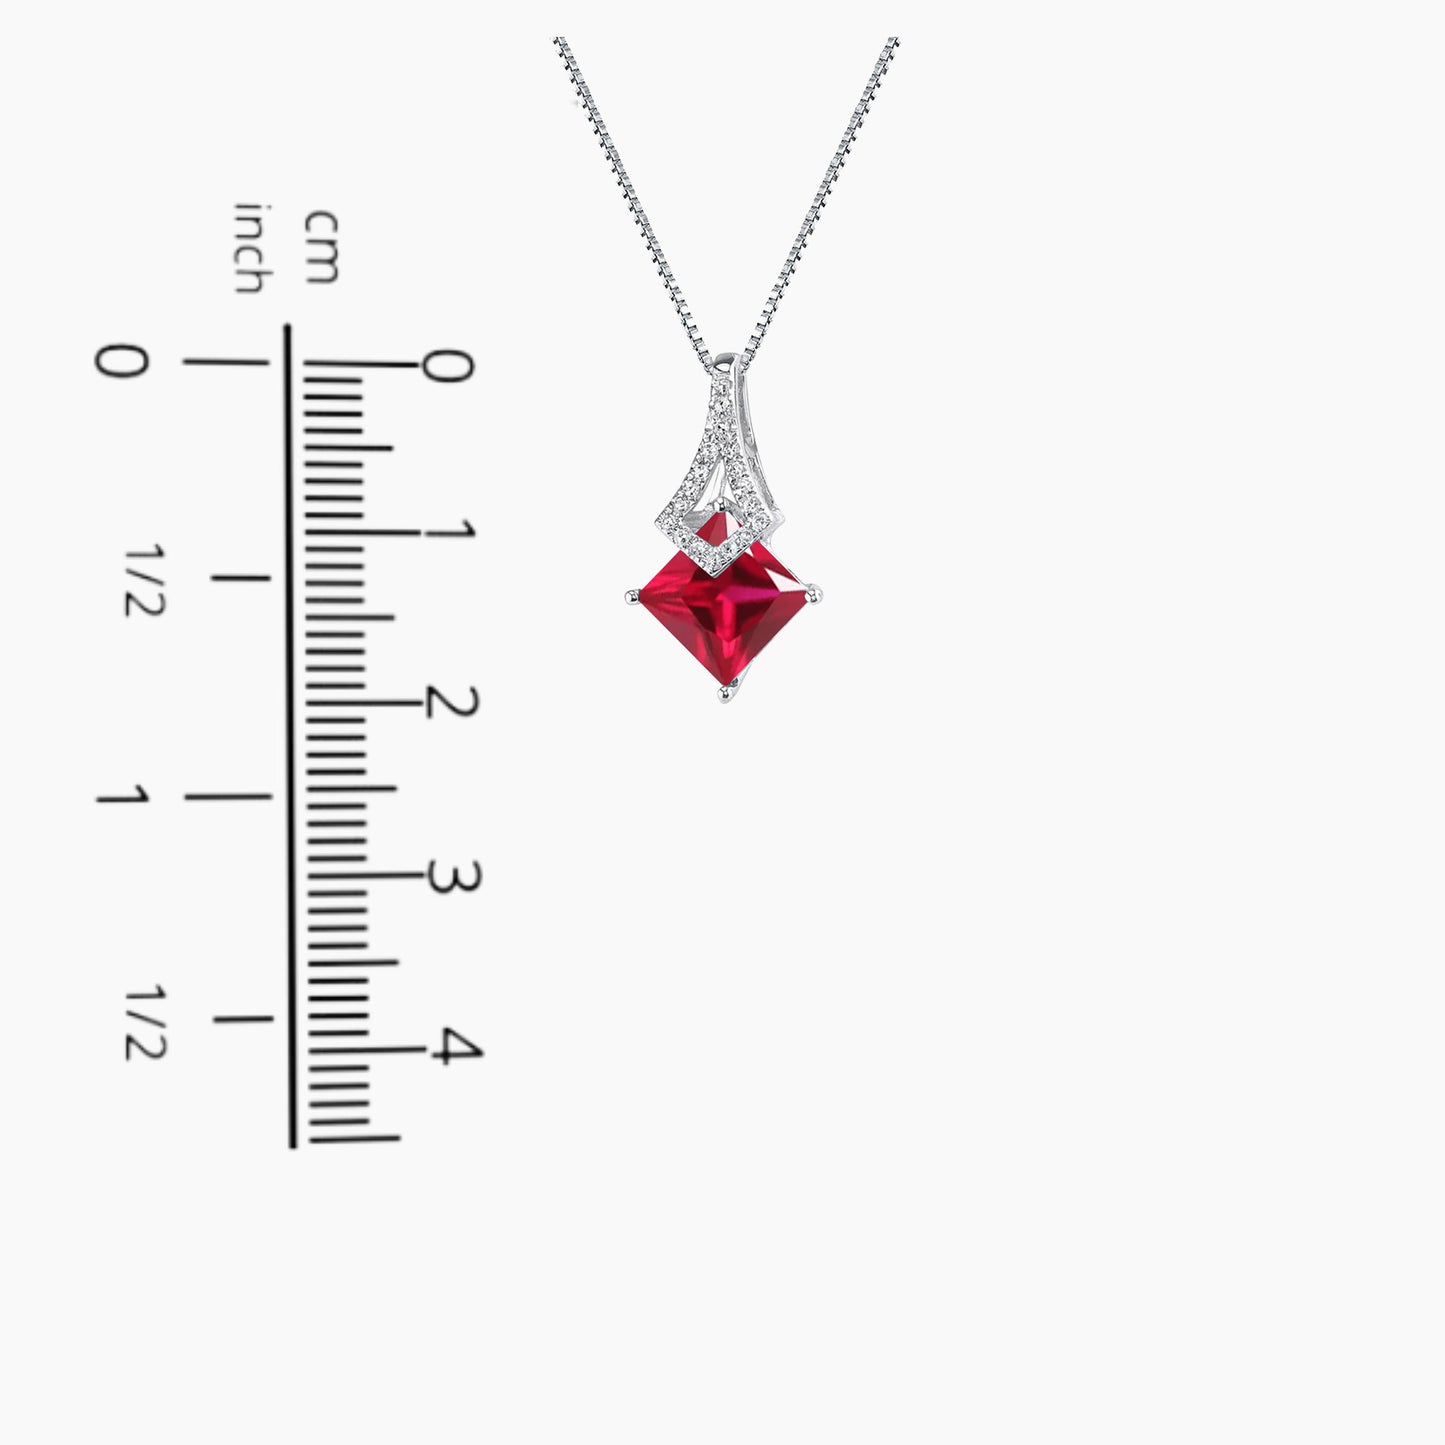 Ruby Princess Cut Pendant Necklace in Sterling Silver